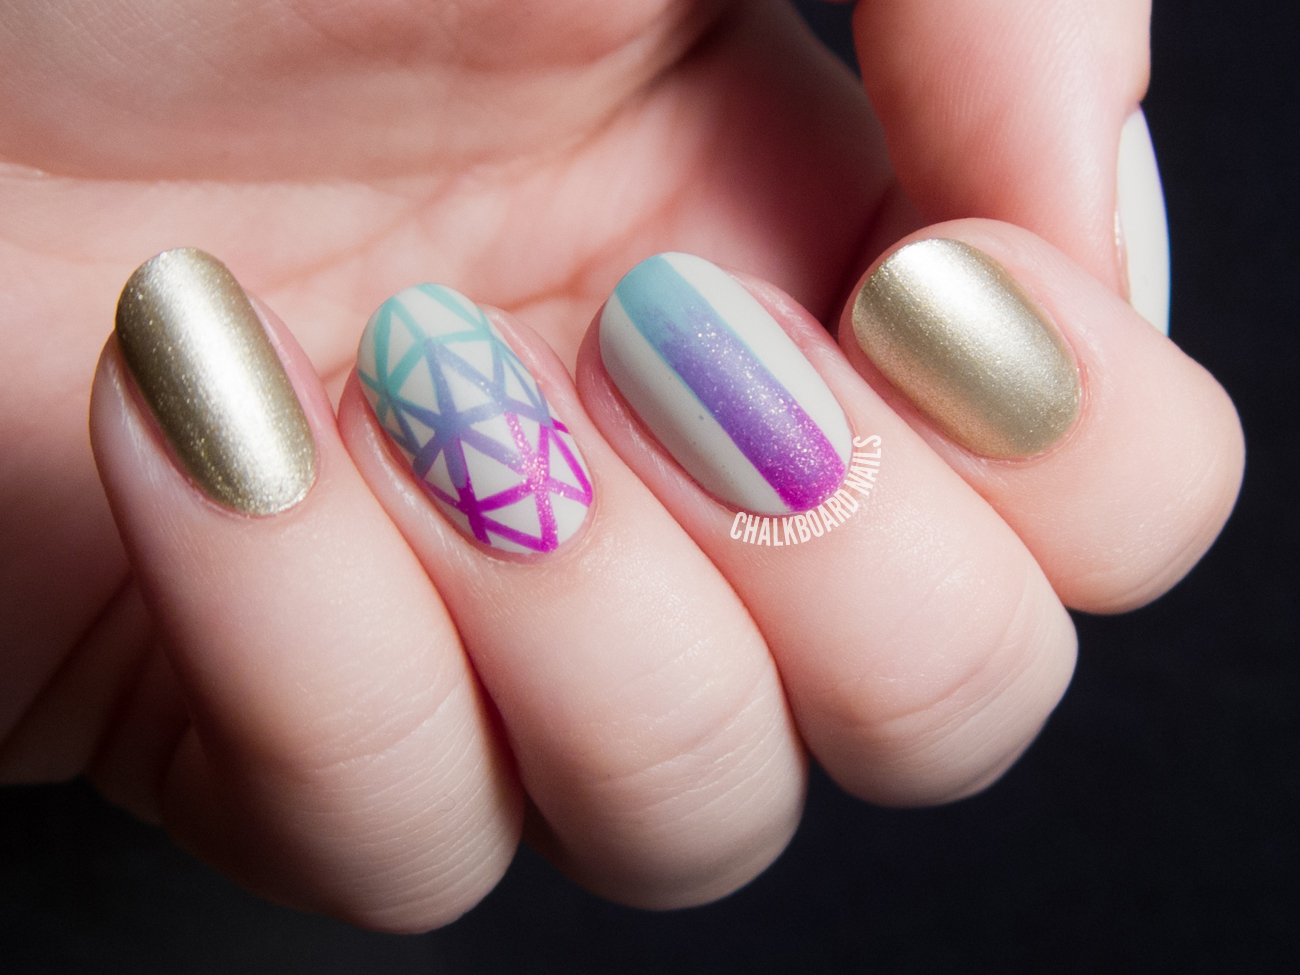 10. Simply Nailogical's Top 10 Gradient Nail Art Designs of All Time - wide 2